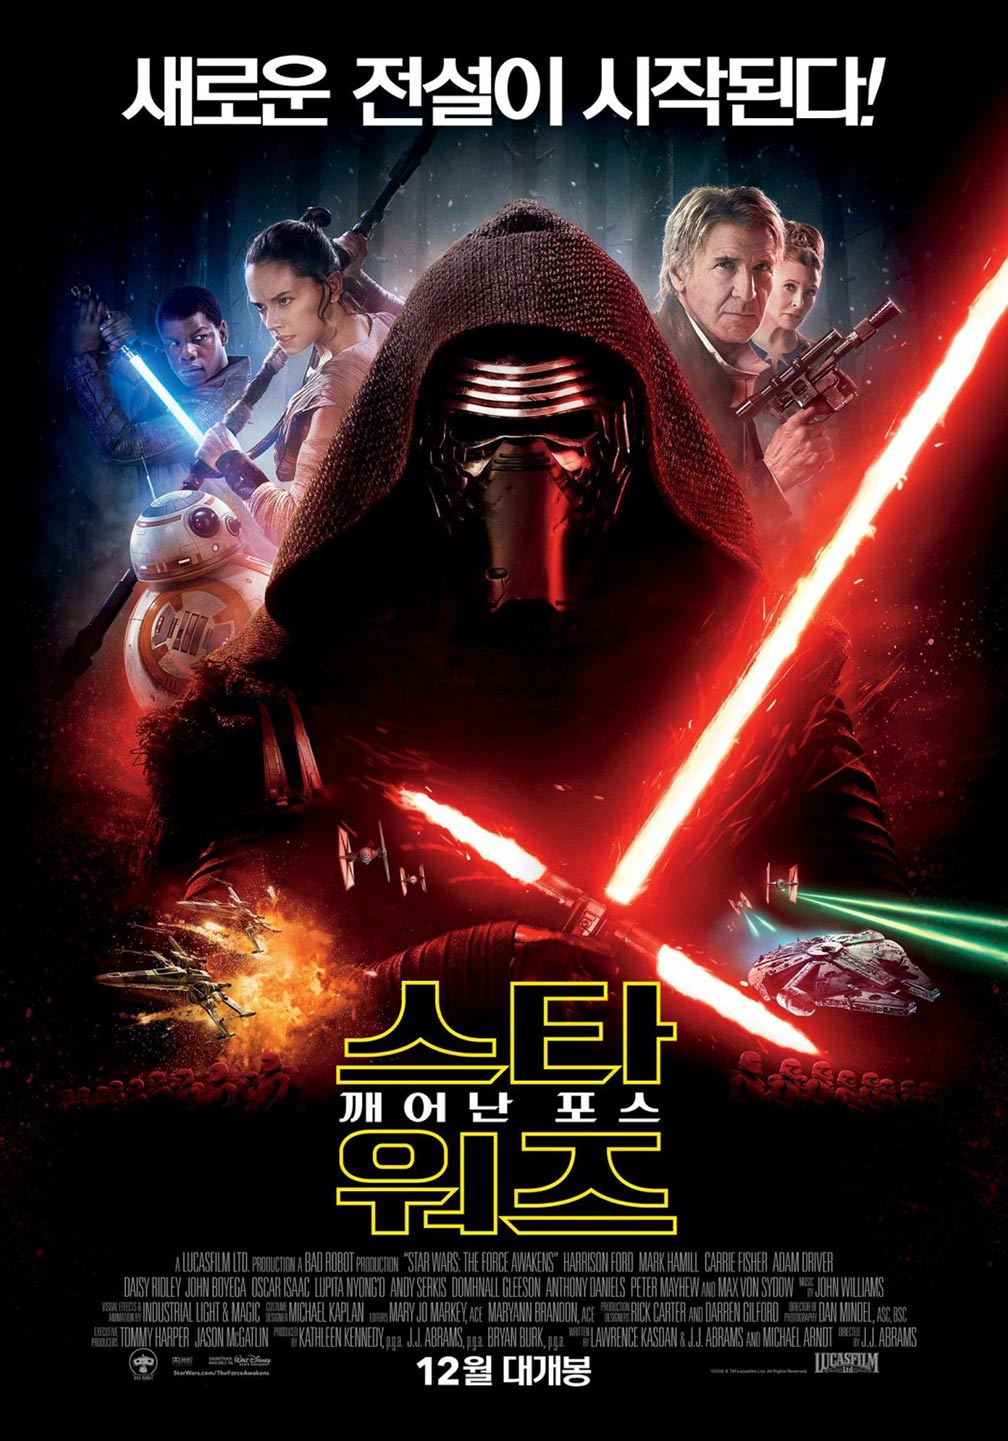 star wars the force awakens game download free